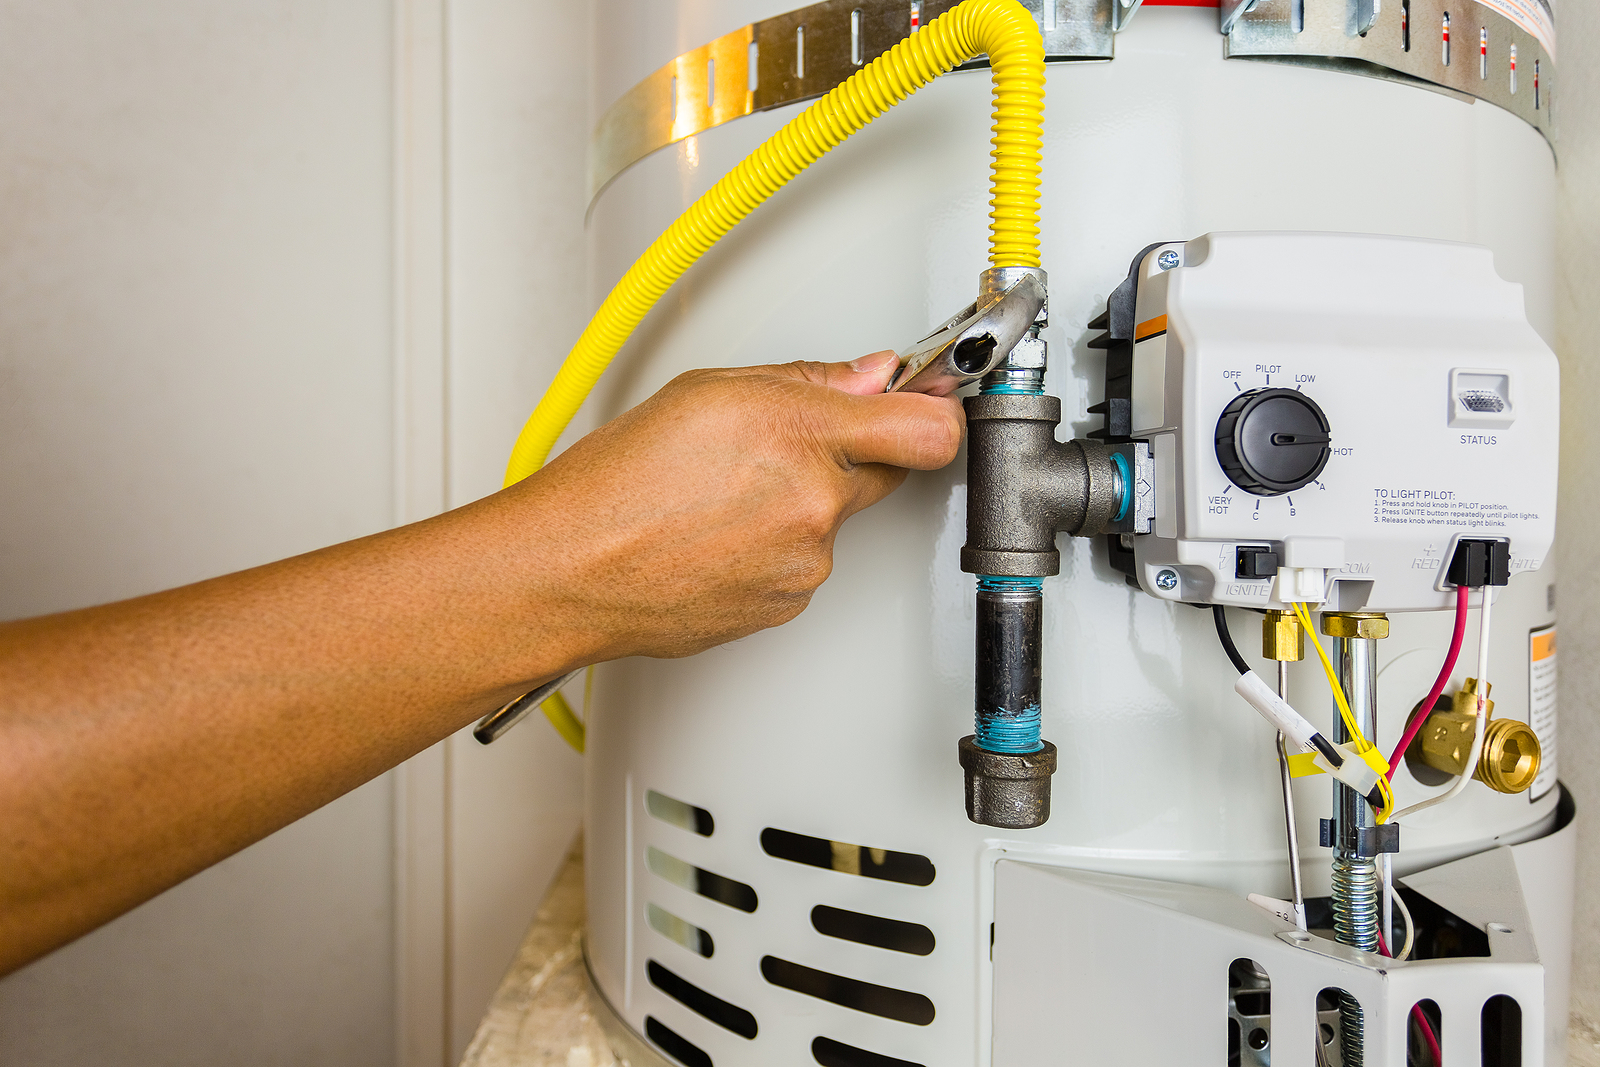 https://www.waldmanplumbing.com/wp-content/uploads/2021/05/5-issues-that-could-trip-the-water-heater-reset-button.jpg